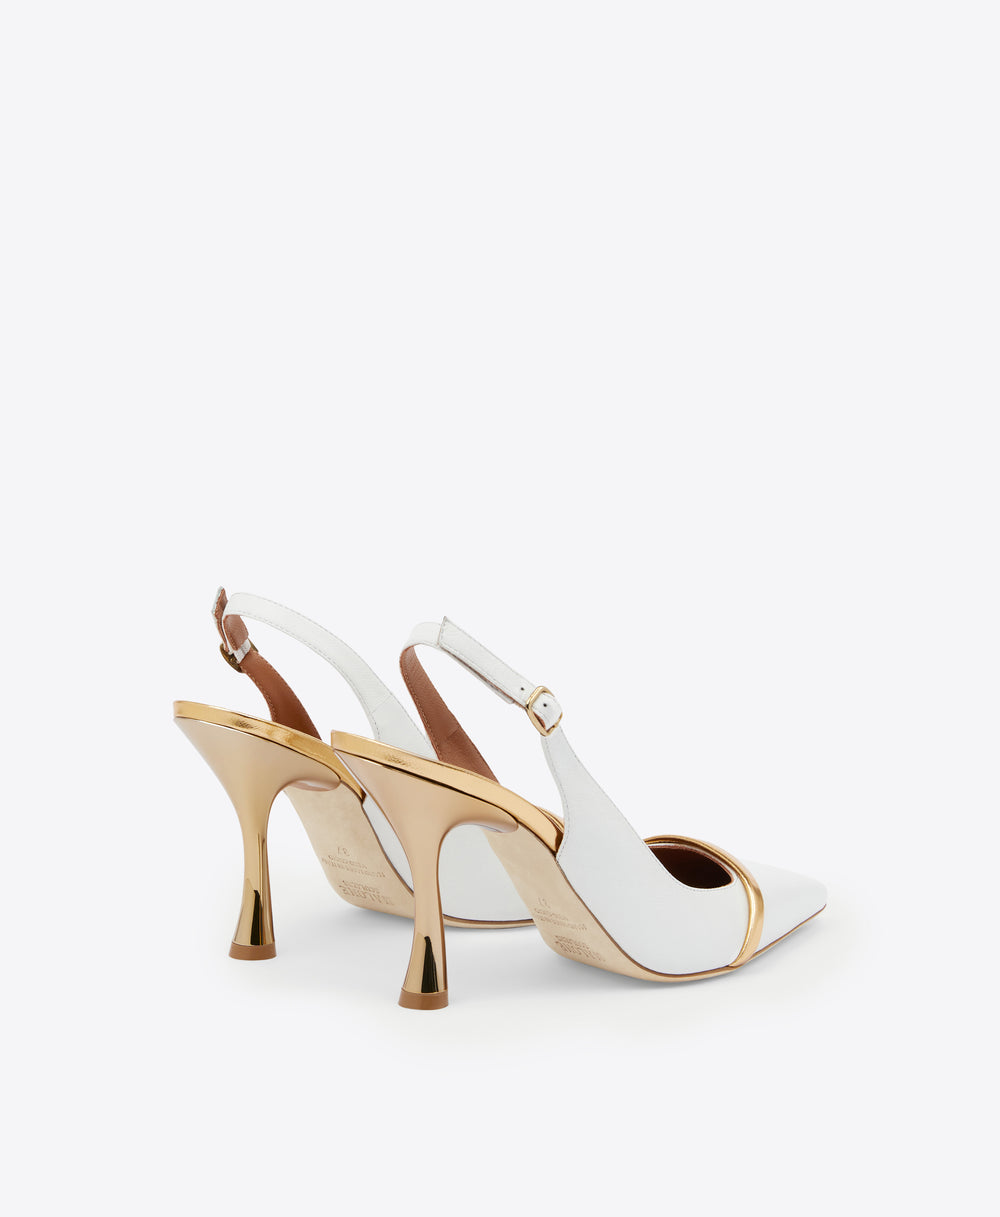 Women's White & Gold Leather Slingback Heels Malone Souliers